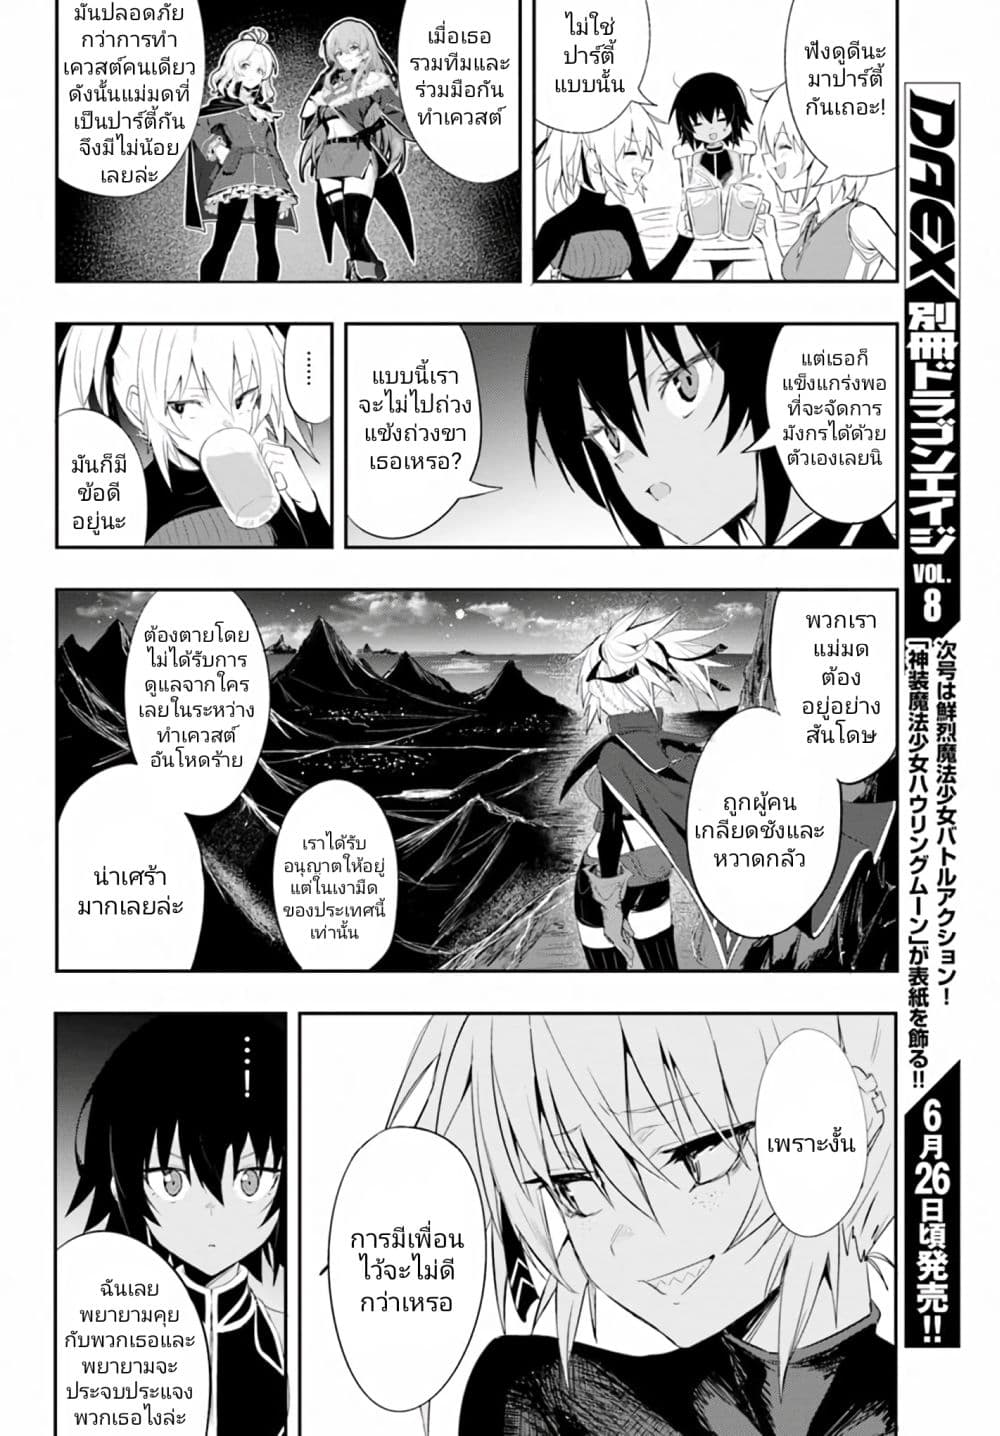 Witch Guild Fantasia 6 (6)